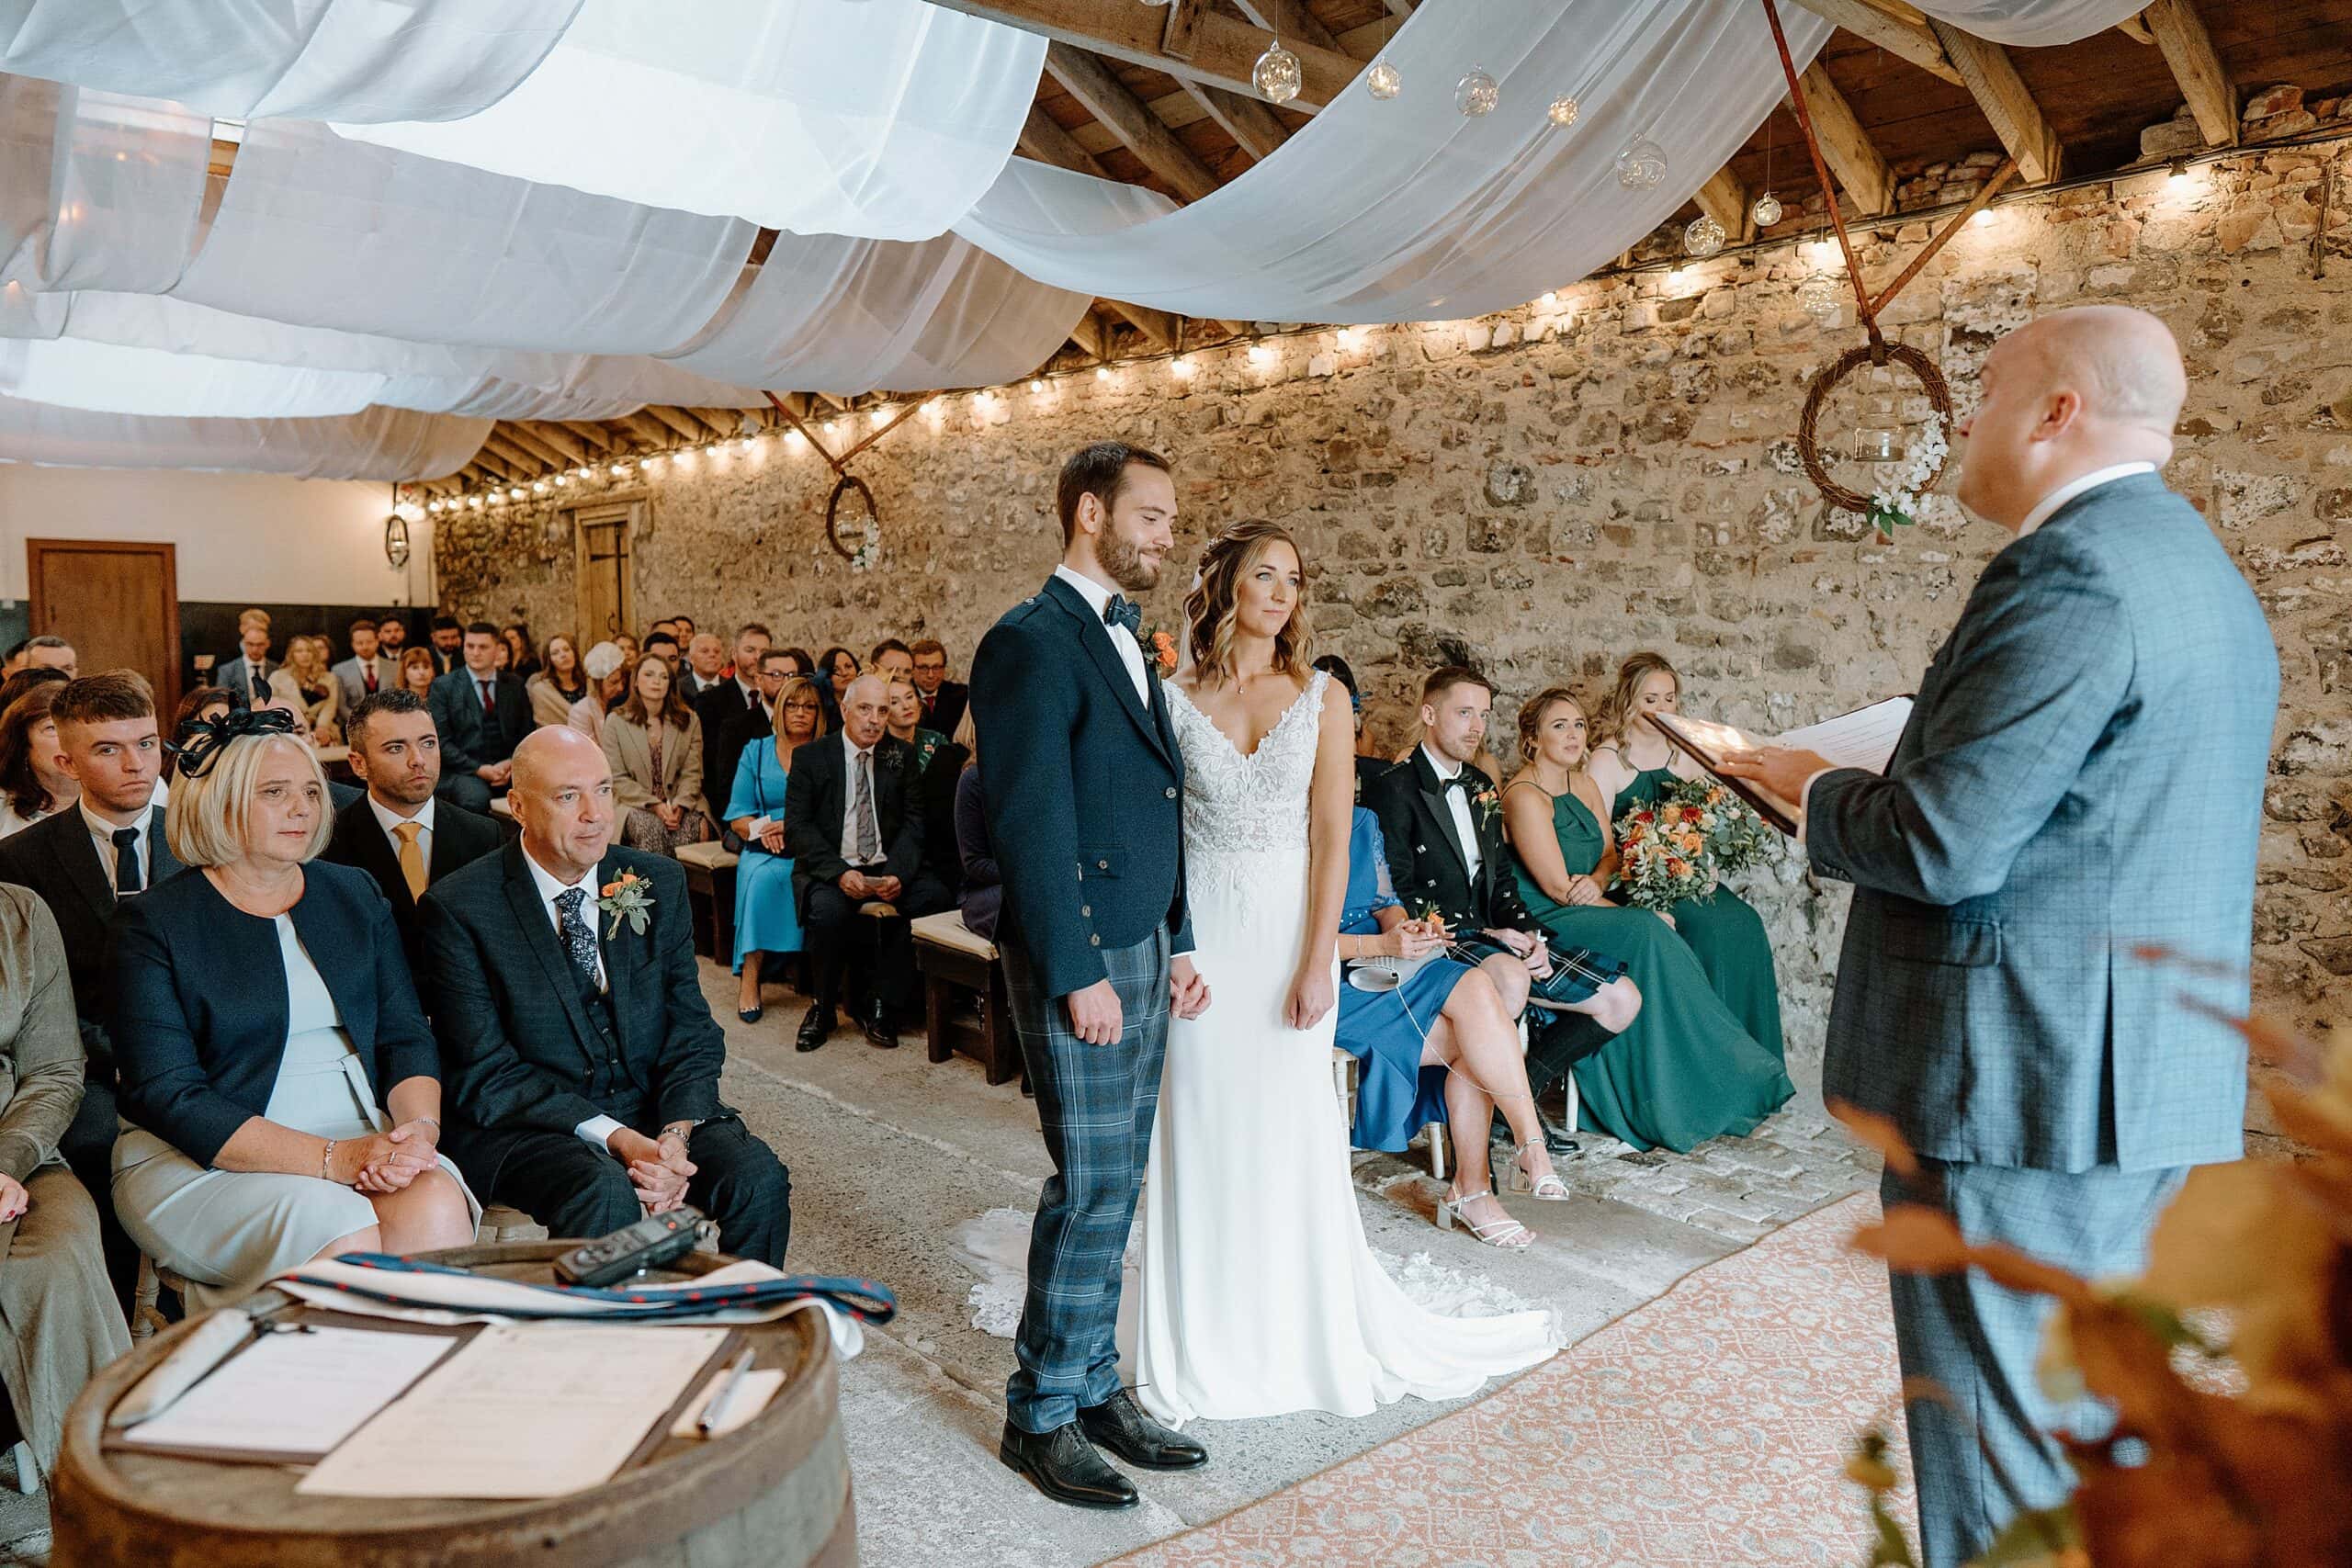 celebrant conducts wedding ceremony at harelaw farm wedding venue fenwick scotland as bride and groom listen standing beneath white ceiling drapes